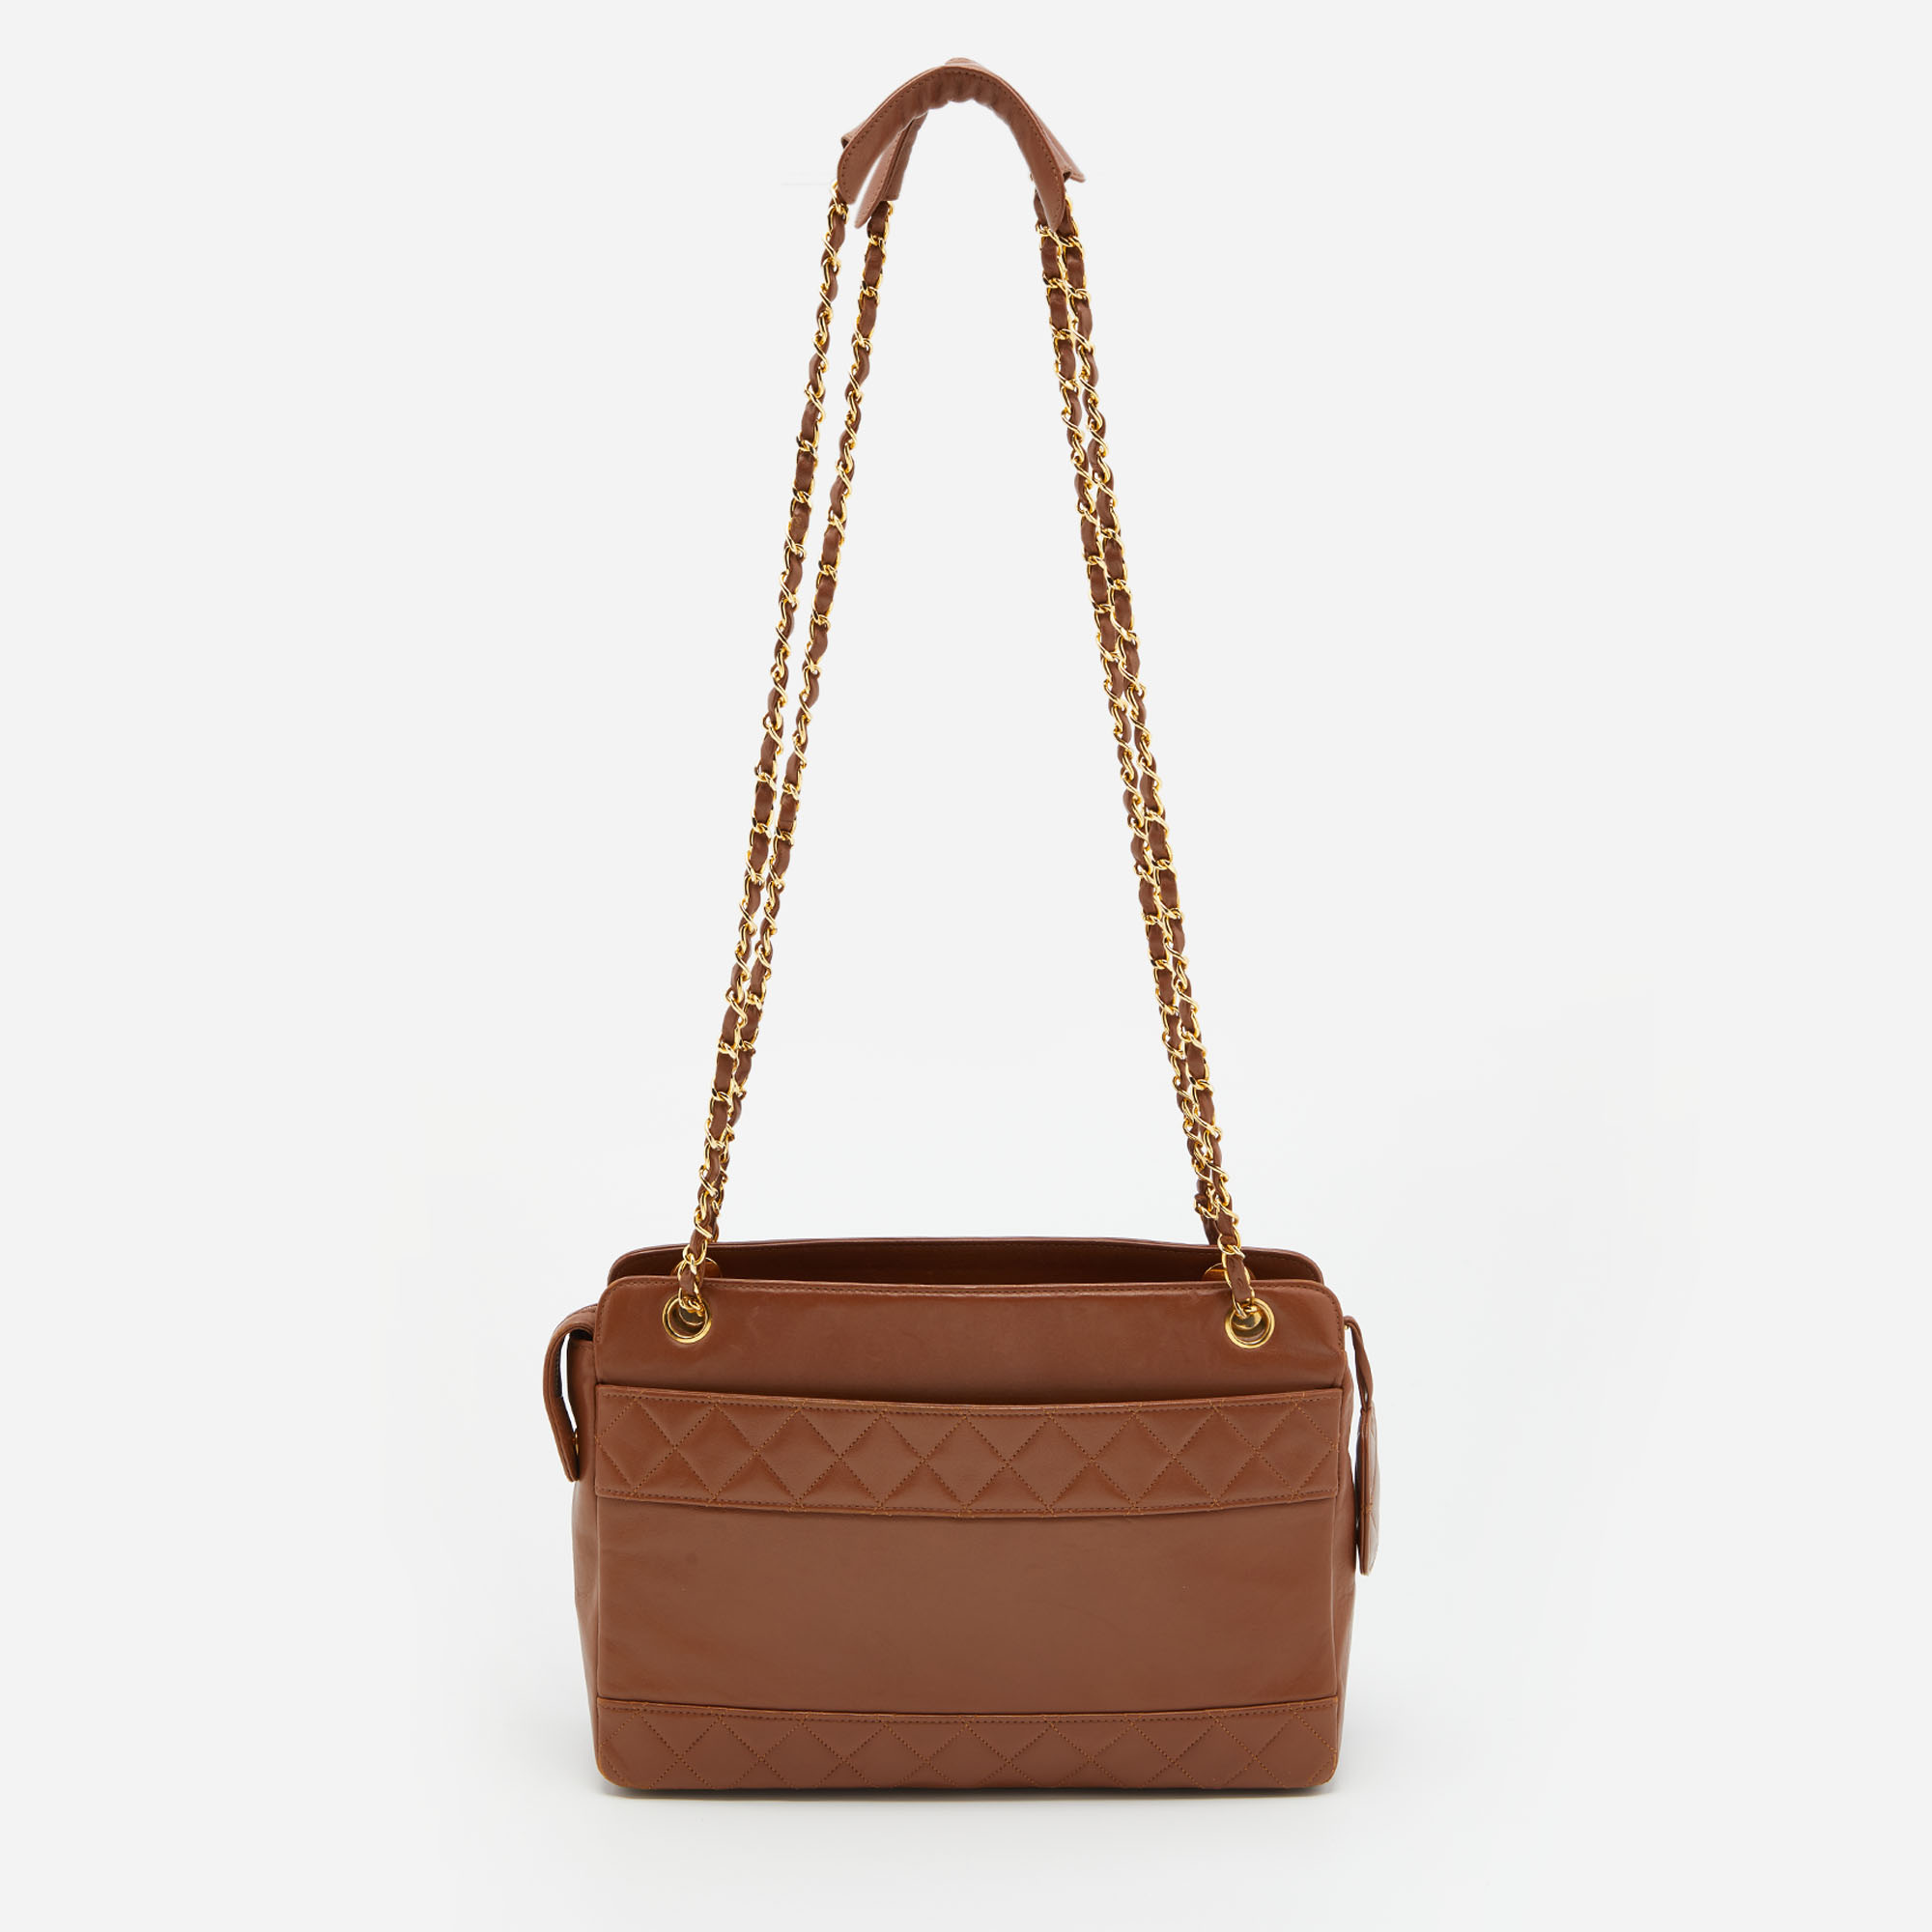 Chanel Brown Quilted Leather Vintage Chain Tote